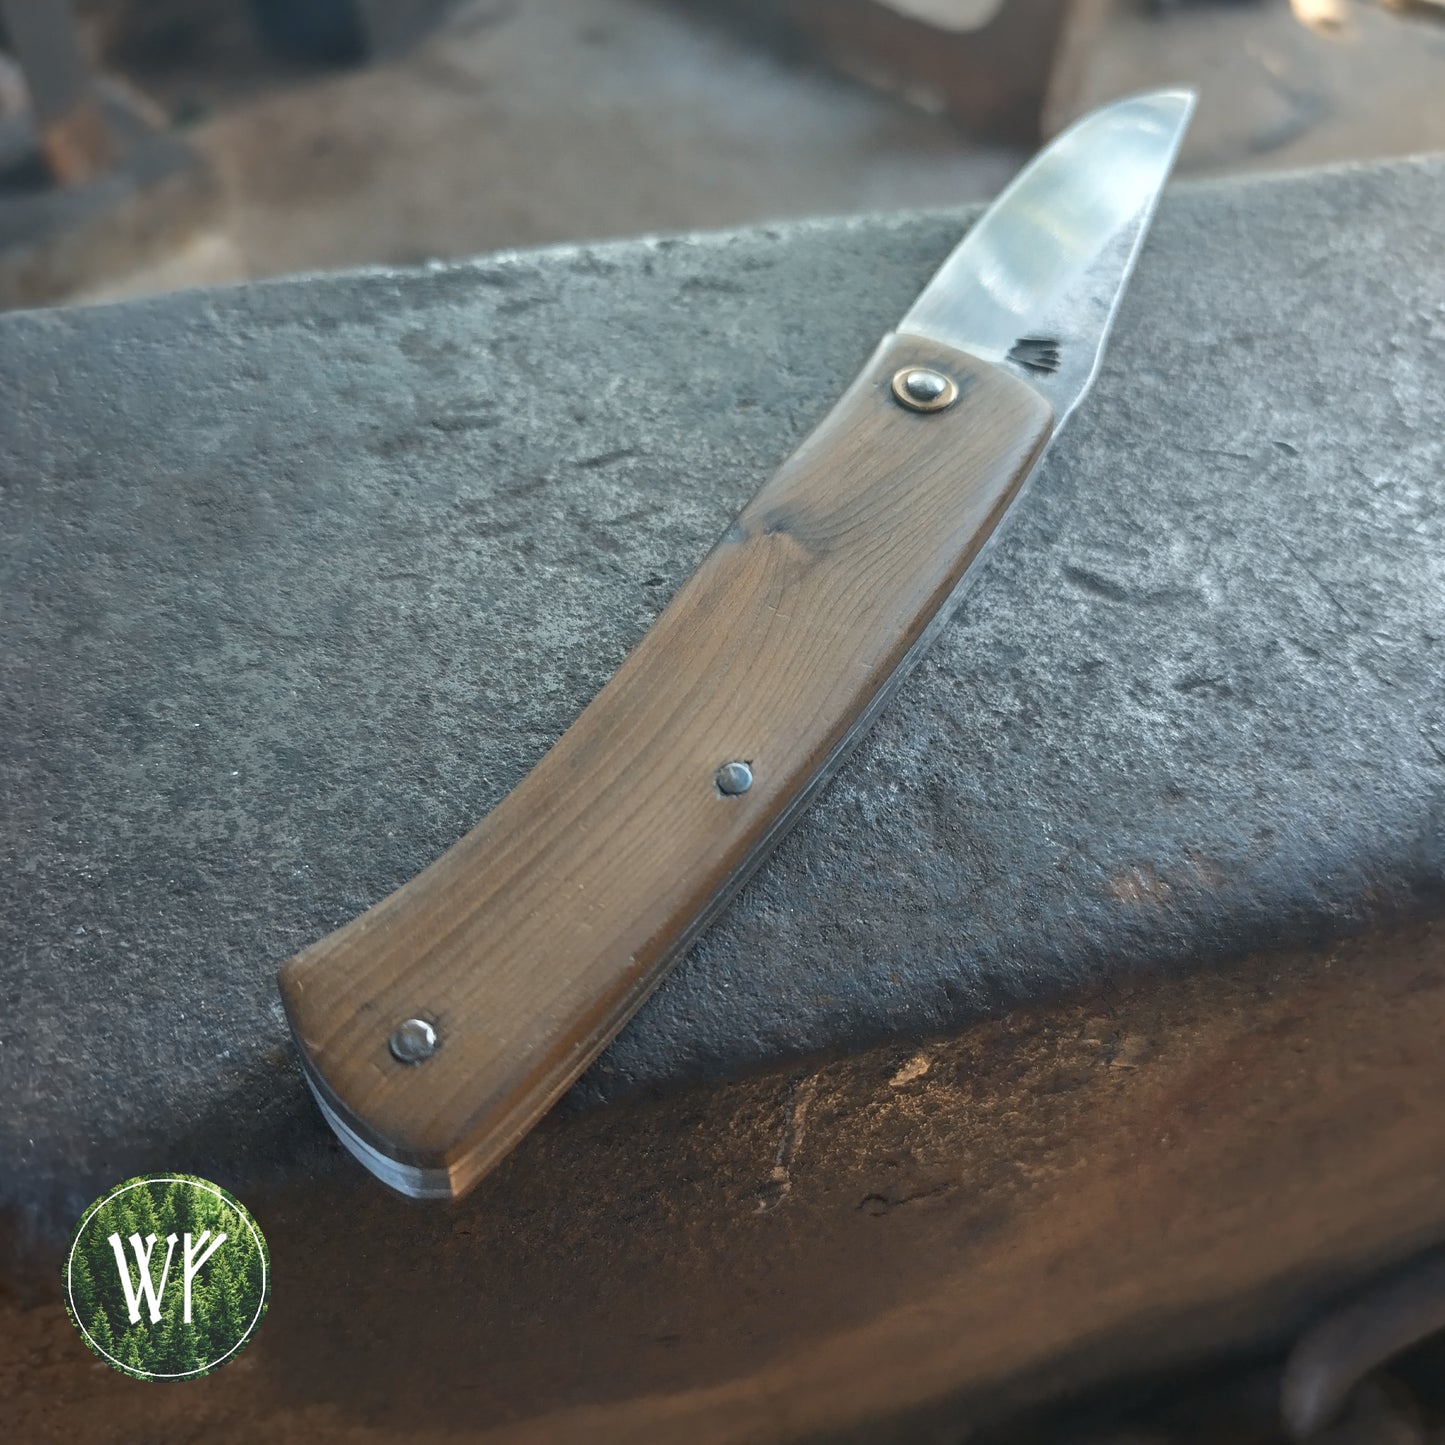 RESERVED FOR SAMUEL Hand-forged Slipjoint / UK Legal Folding Knife / 26c3 Blade with Bog YewHandle